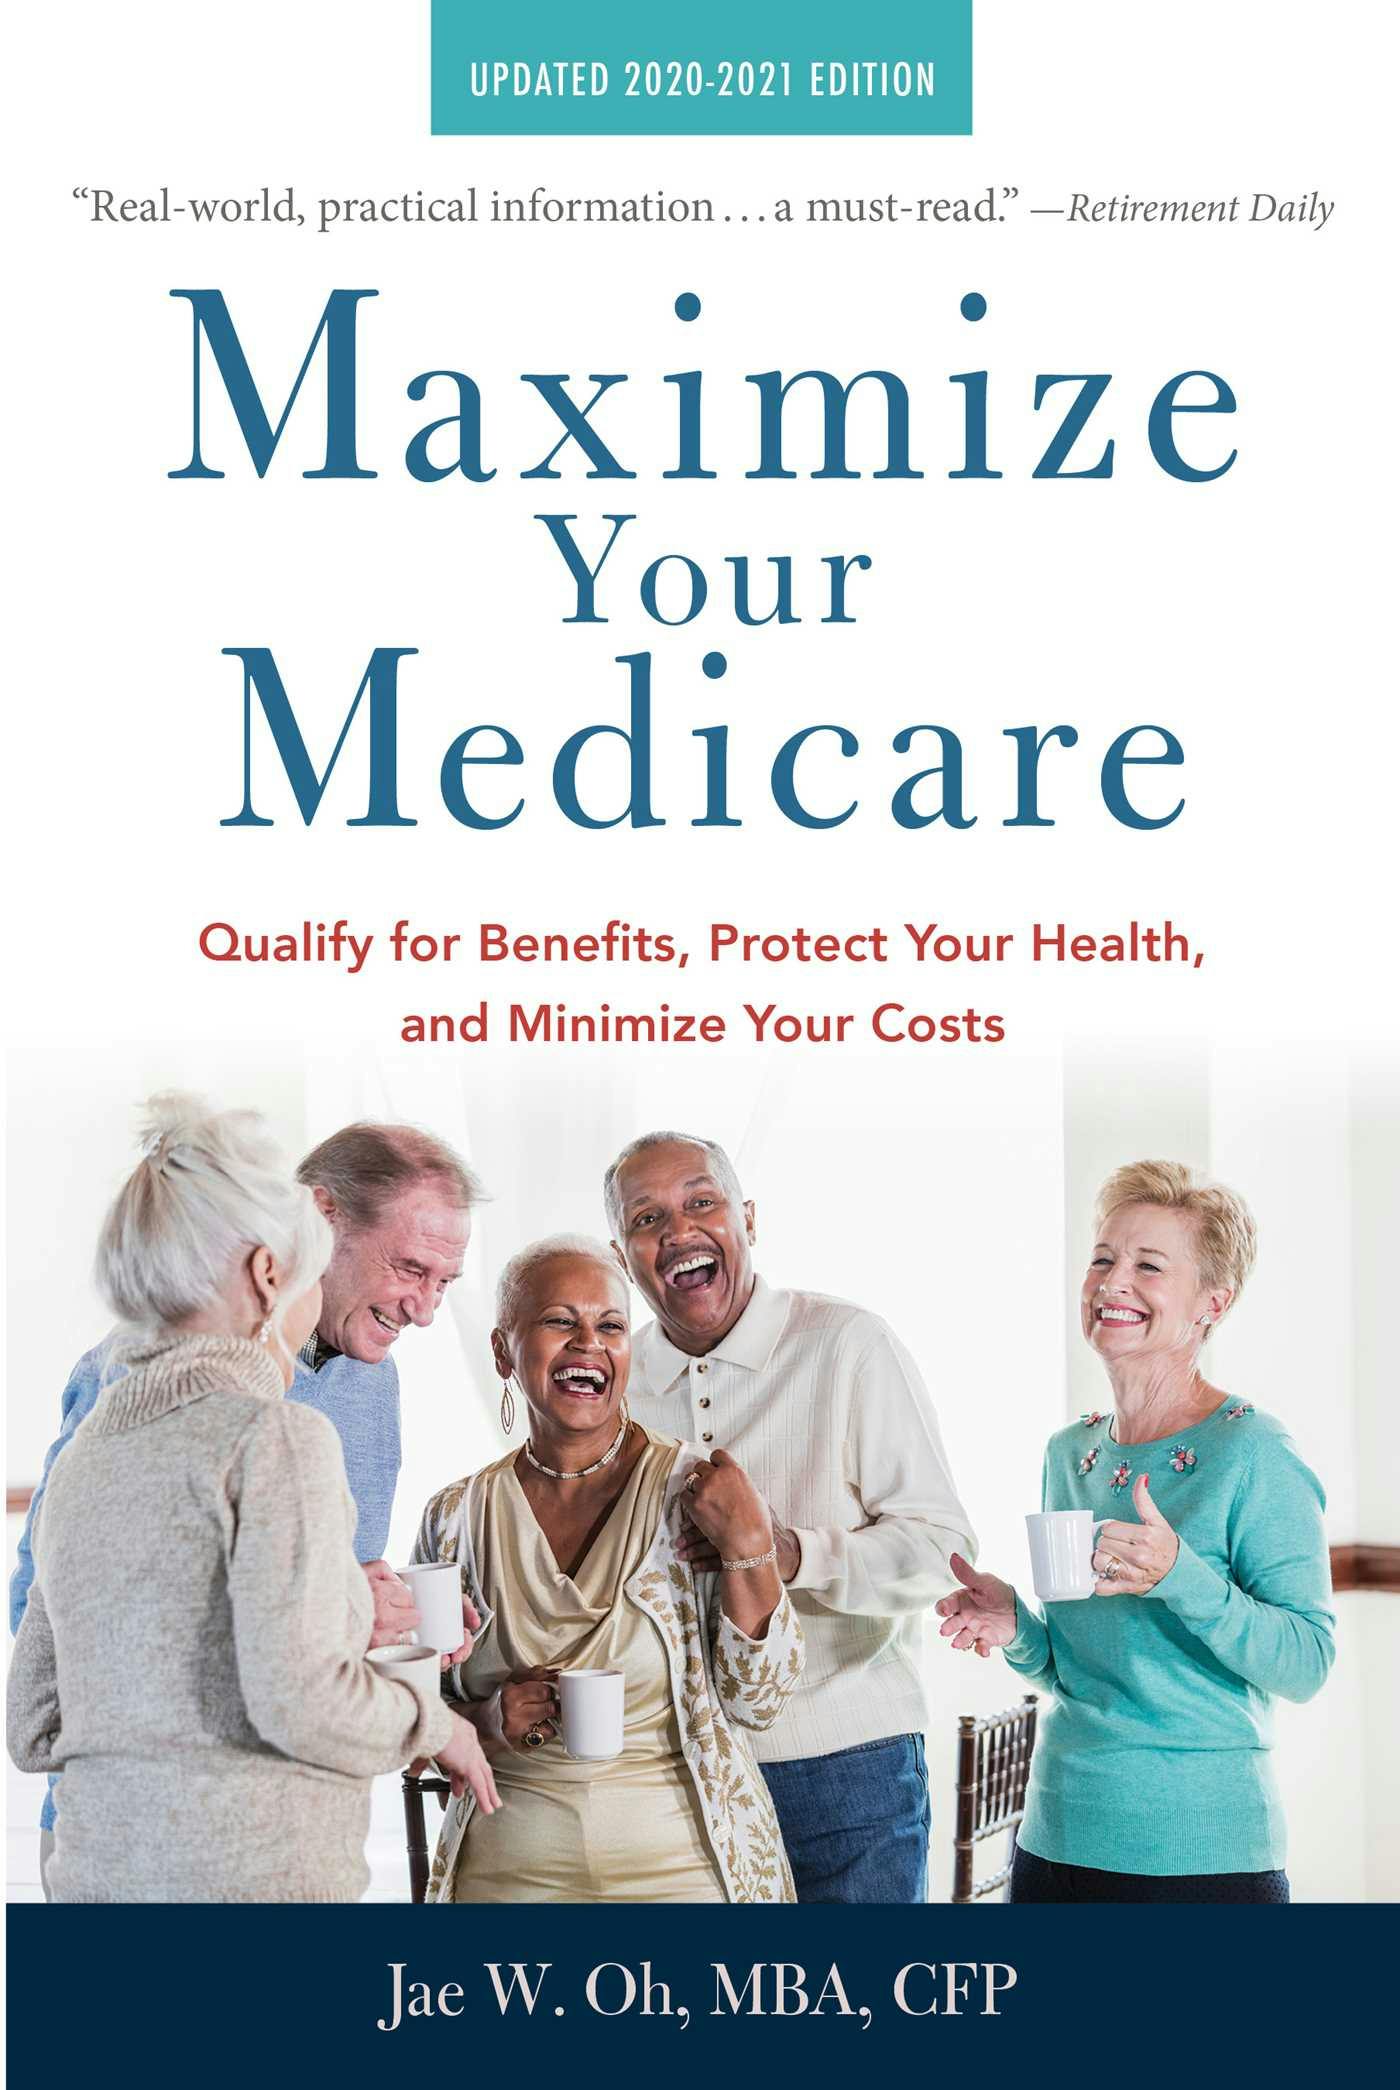 Maximize Your Medicare: 2020-2021 Edition: Qualify for Benefits, Protect Your Health, and Minimize Your Costs - Jae Oh